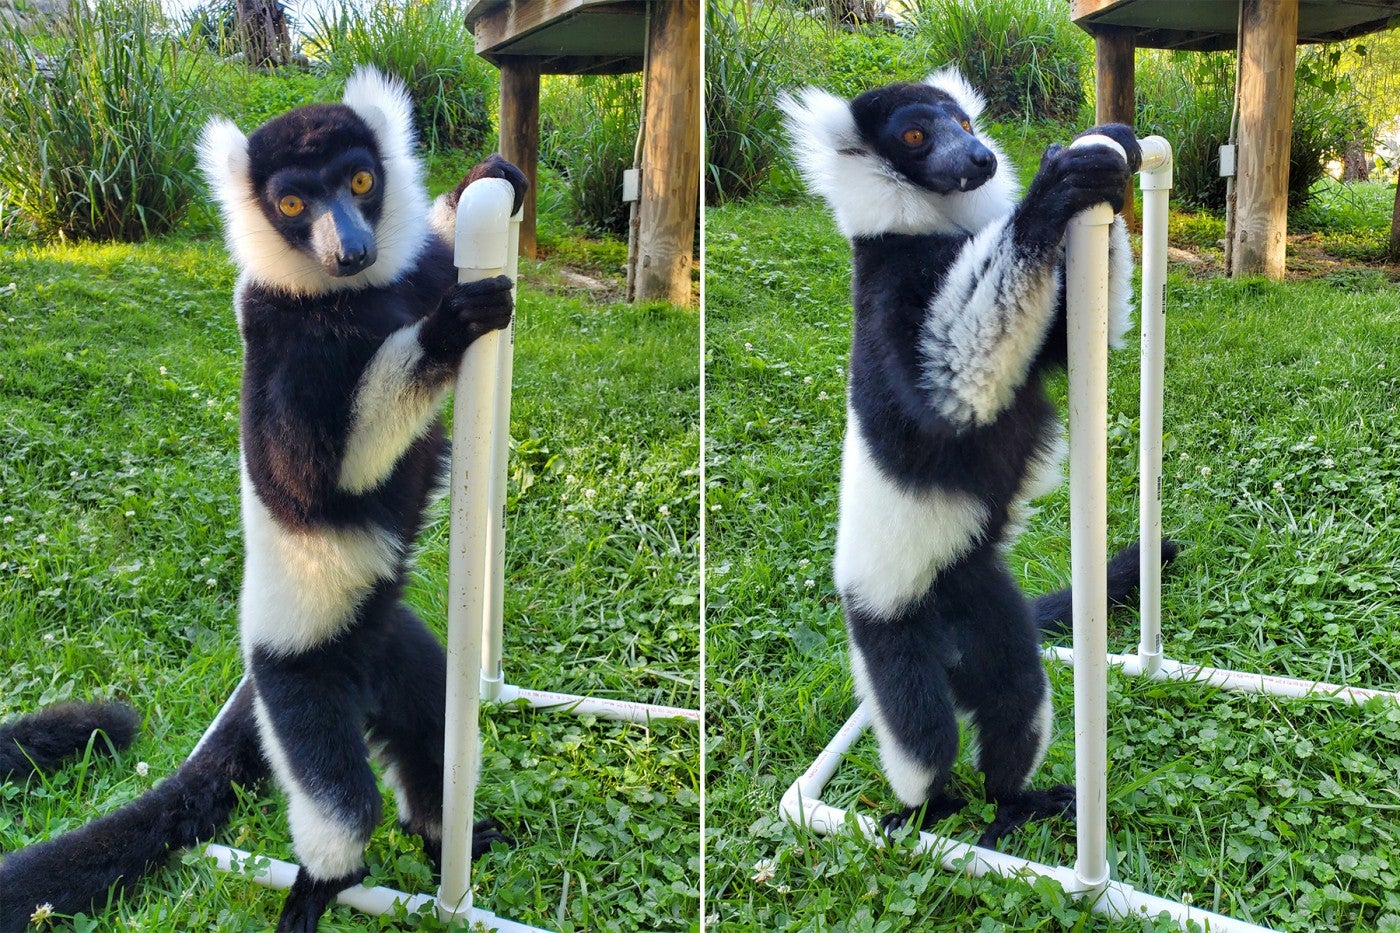 Black-and-white ruffed lemurs Aloke (left) and Wiley hold on to the taller PVC "t-stand" during their radiograph training sessions.